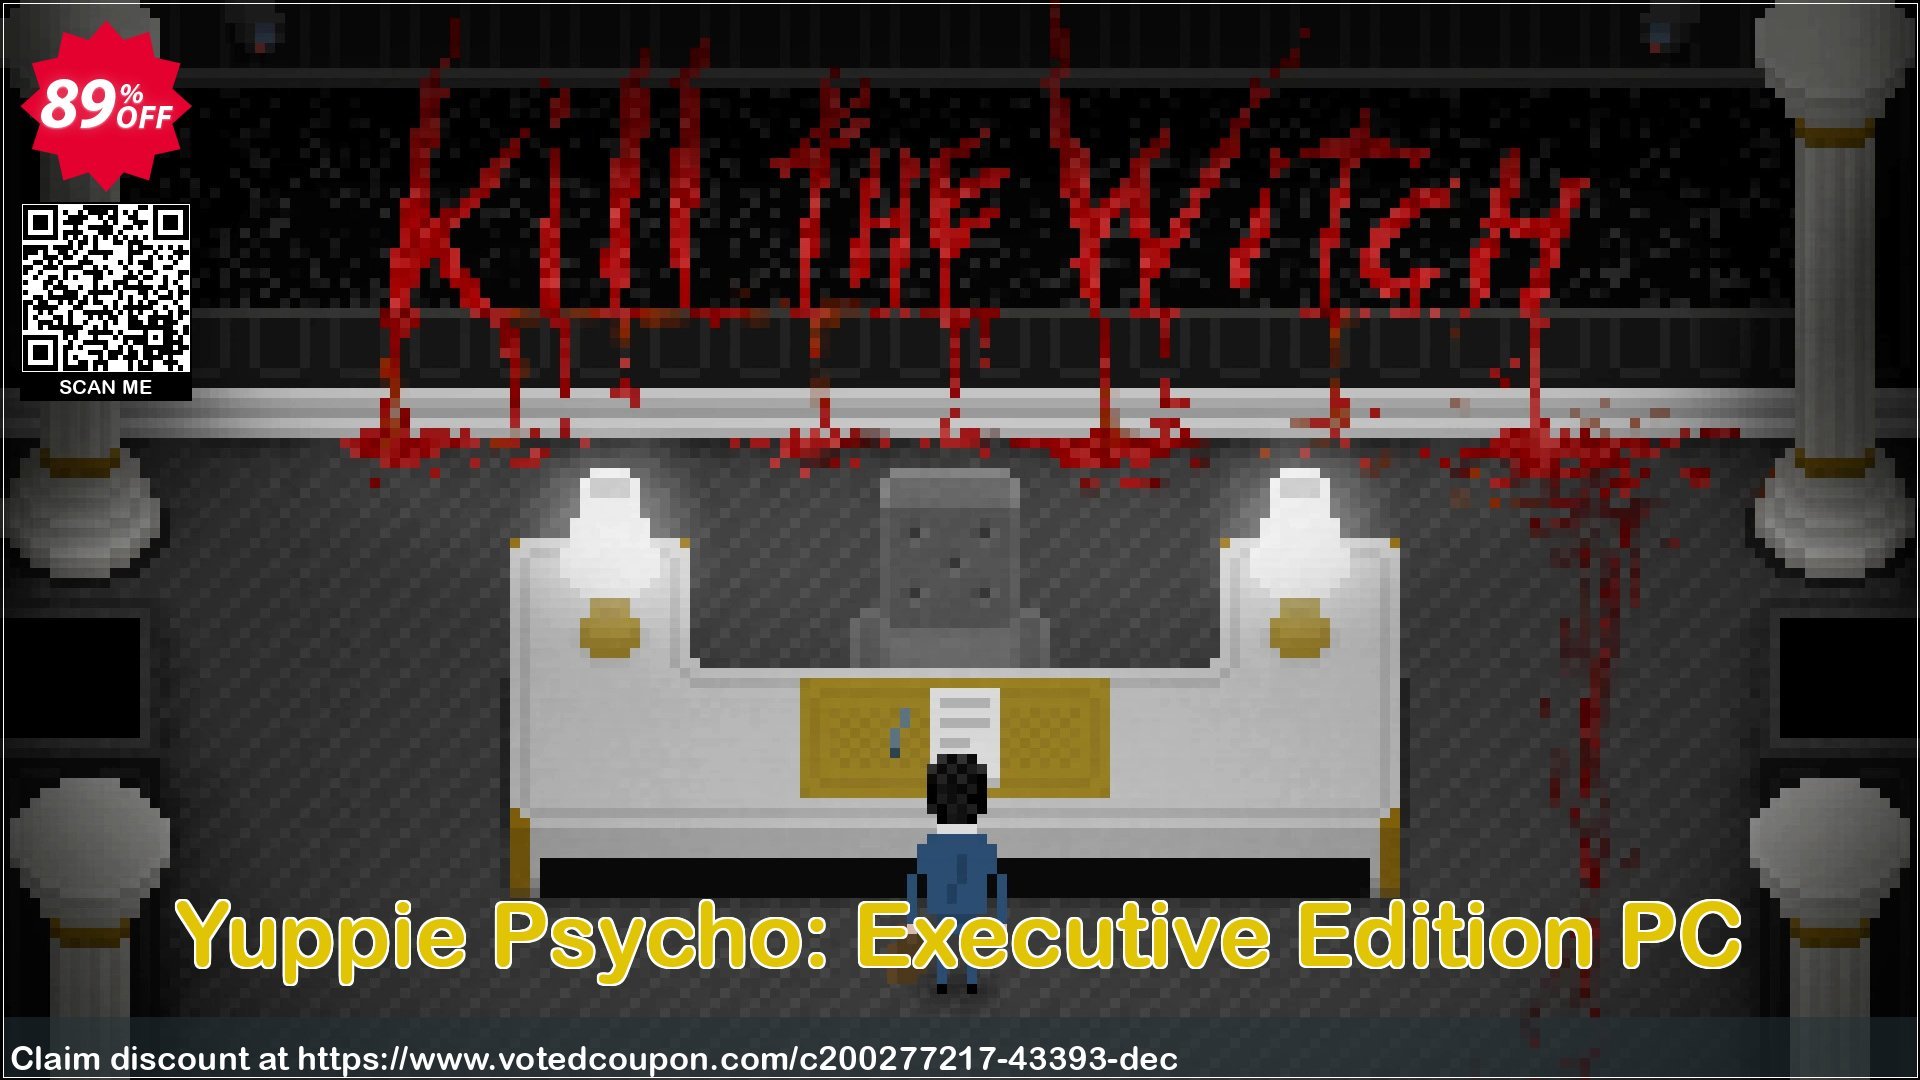 Yuppie Psycho: Executive Edition PC Coupon Code May 2024, 89% OFF - VotedCoupon